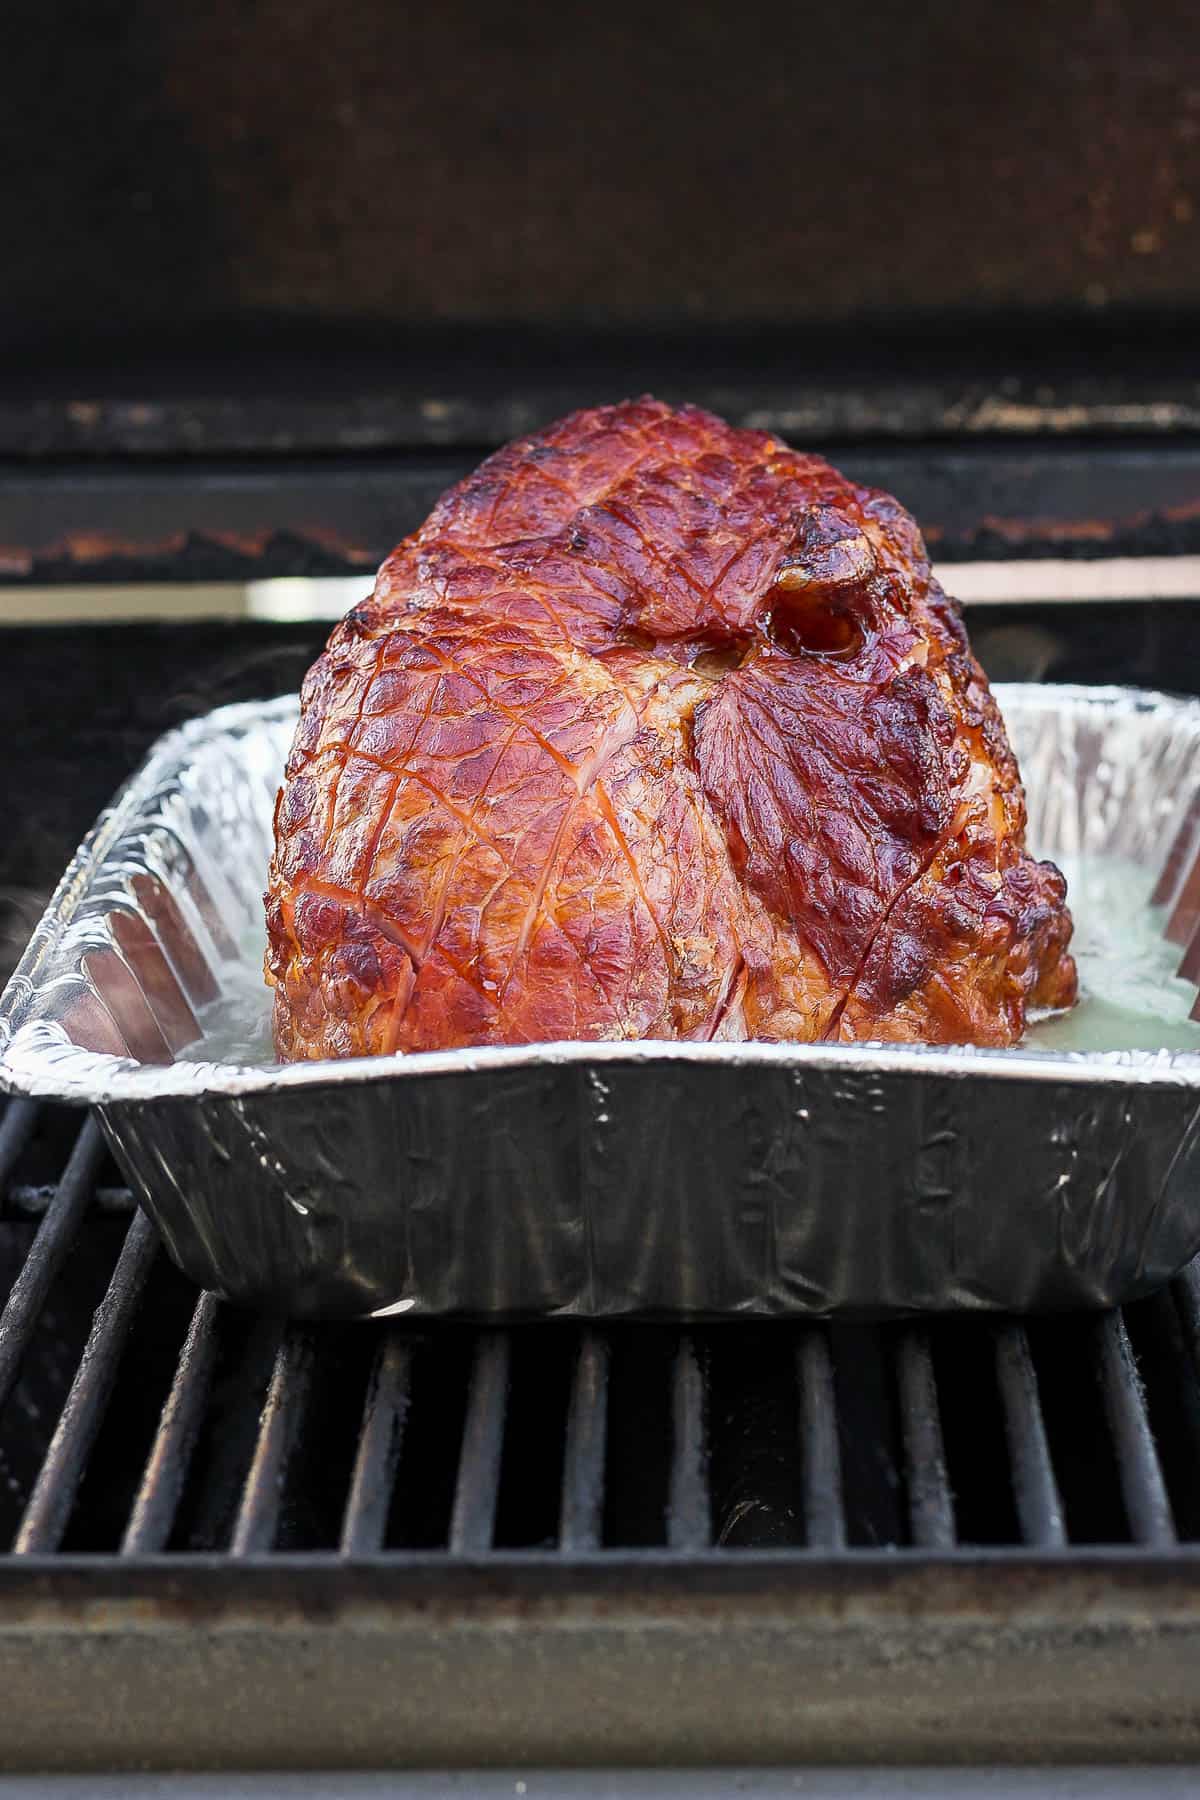 The ham in the roasting pan and being placed on the grill.